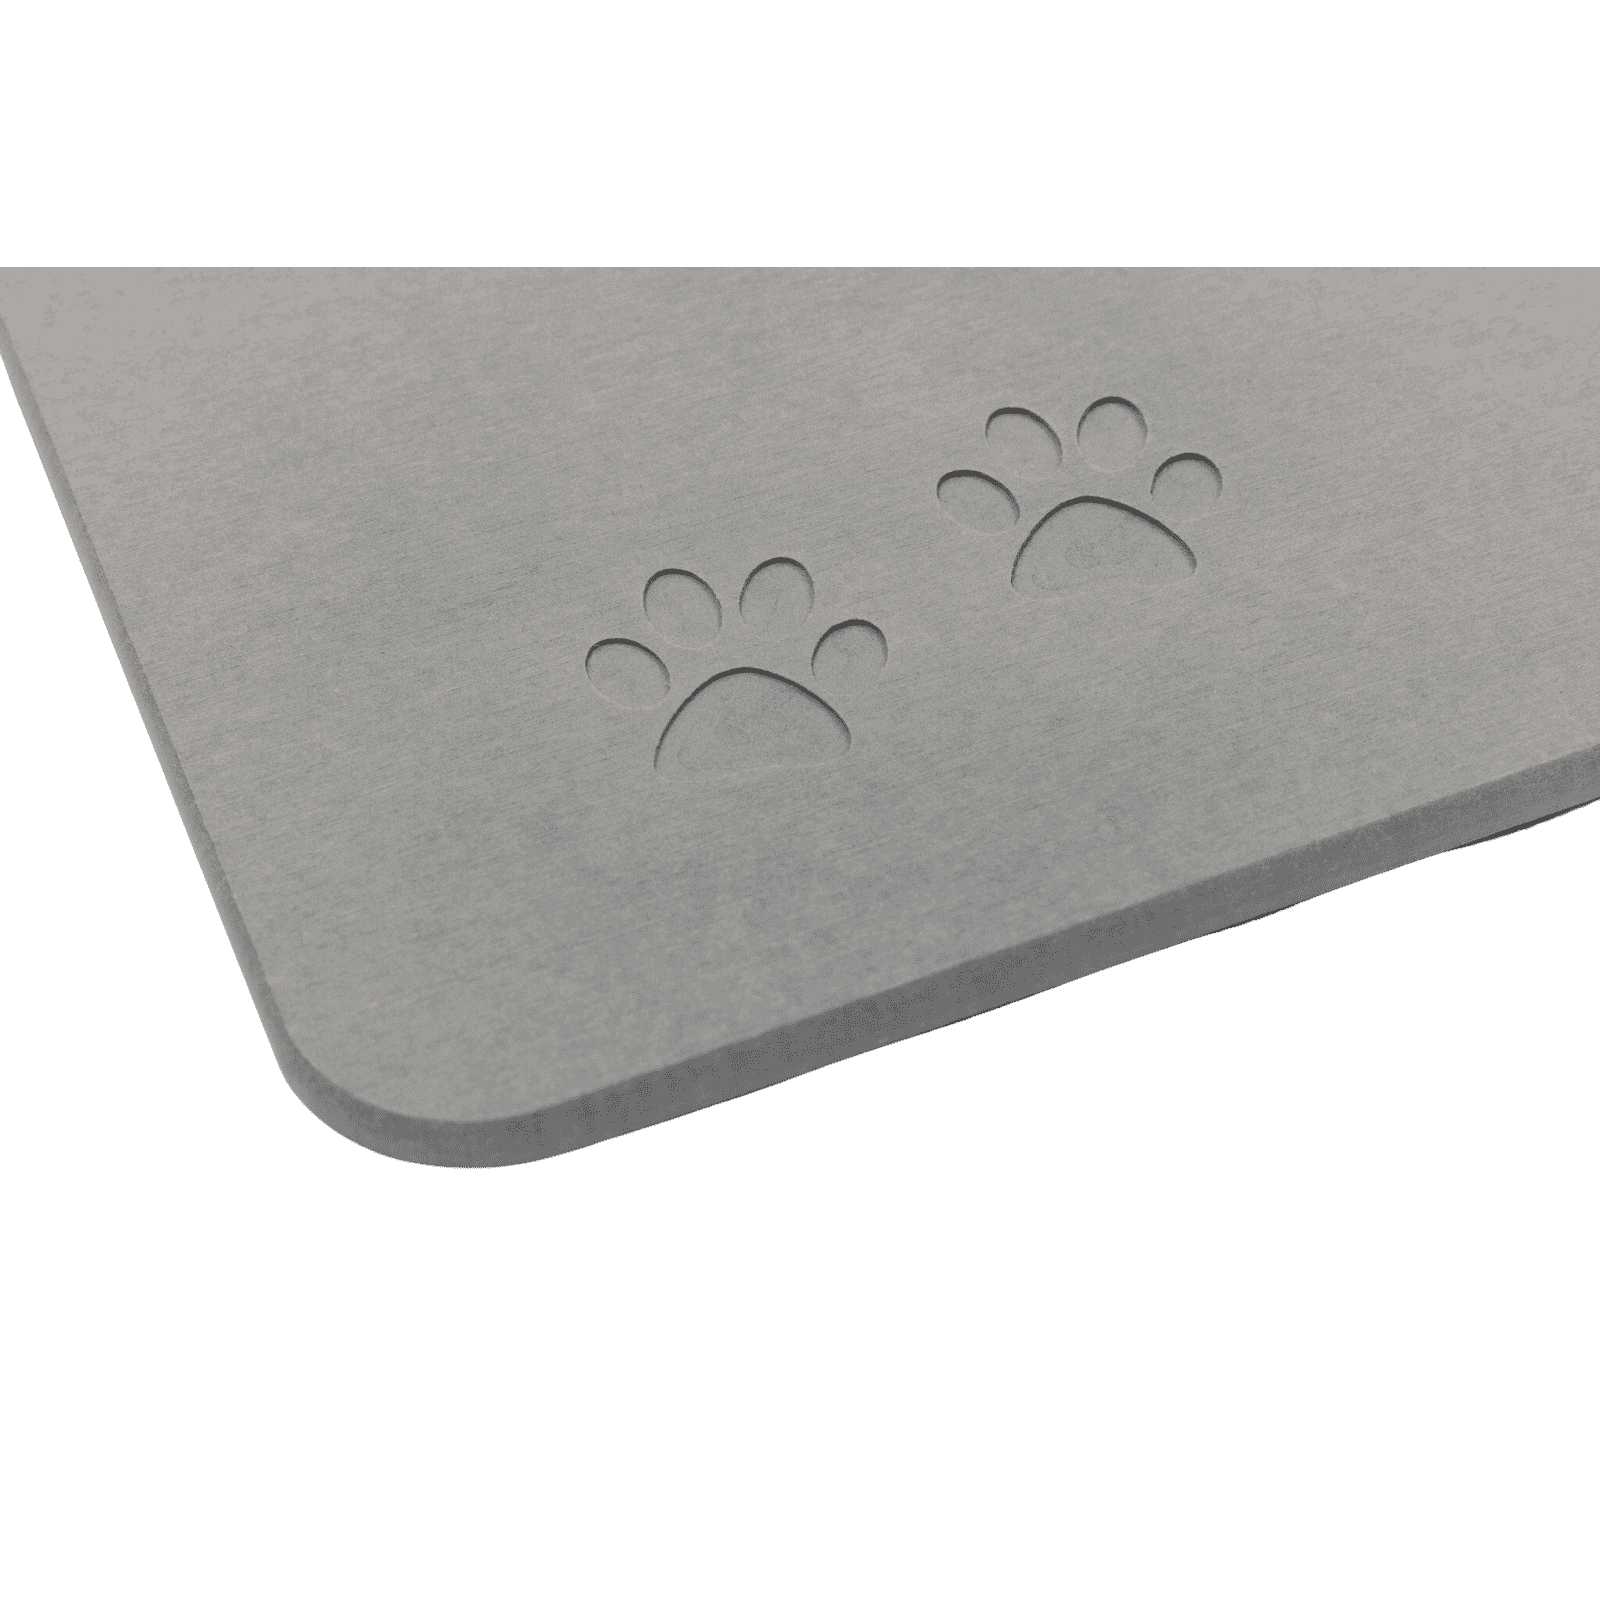 Water-absorbing Pet Feeding Mat - Water-absorbing Dog Mat For Food And Water  Bowls - Stain-free And Easy-to-clean Dog Food Mat - Quick-drying Dog Water  Dispenser Mat - Puppy Supplies Dog Supplies 